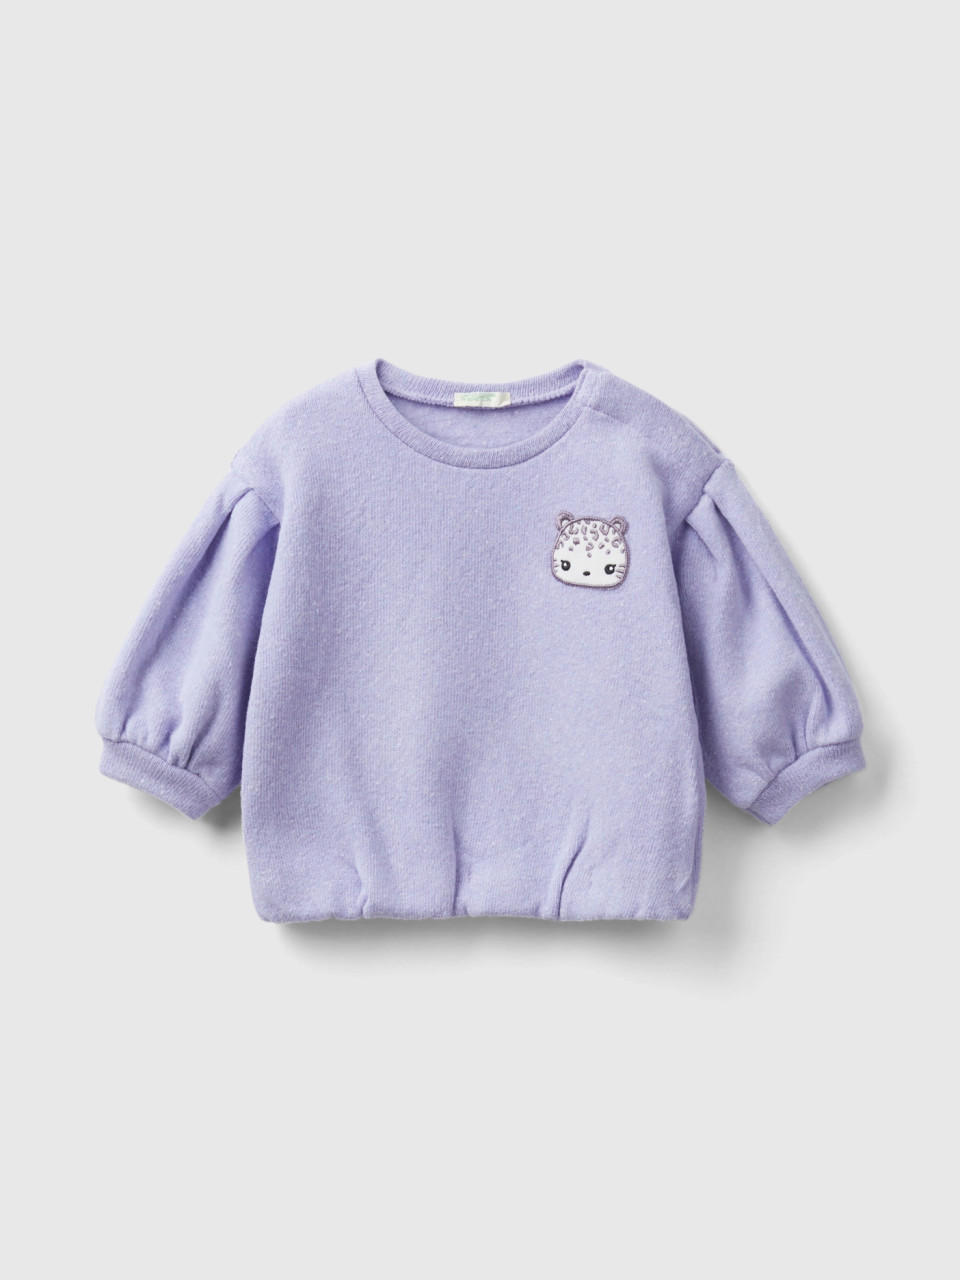 Benetton, Sweatshirt With Patch In Recycled Cotton Blend, Lilac, Kids